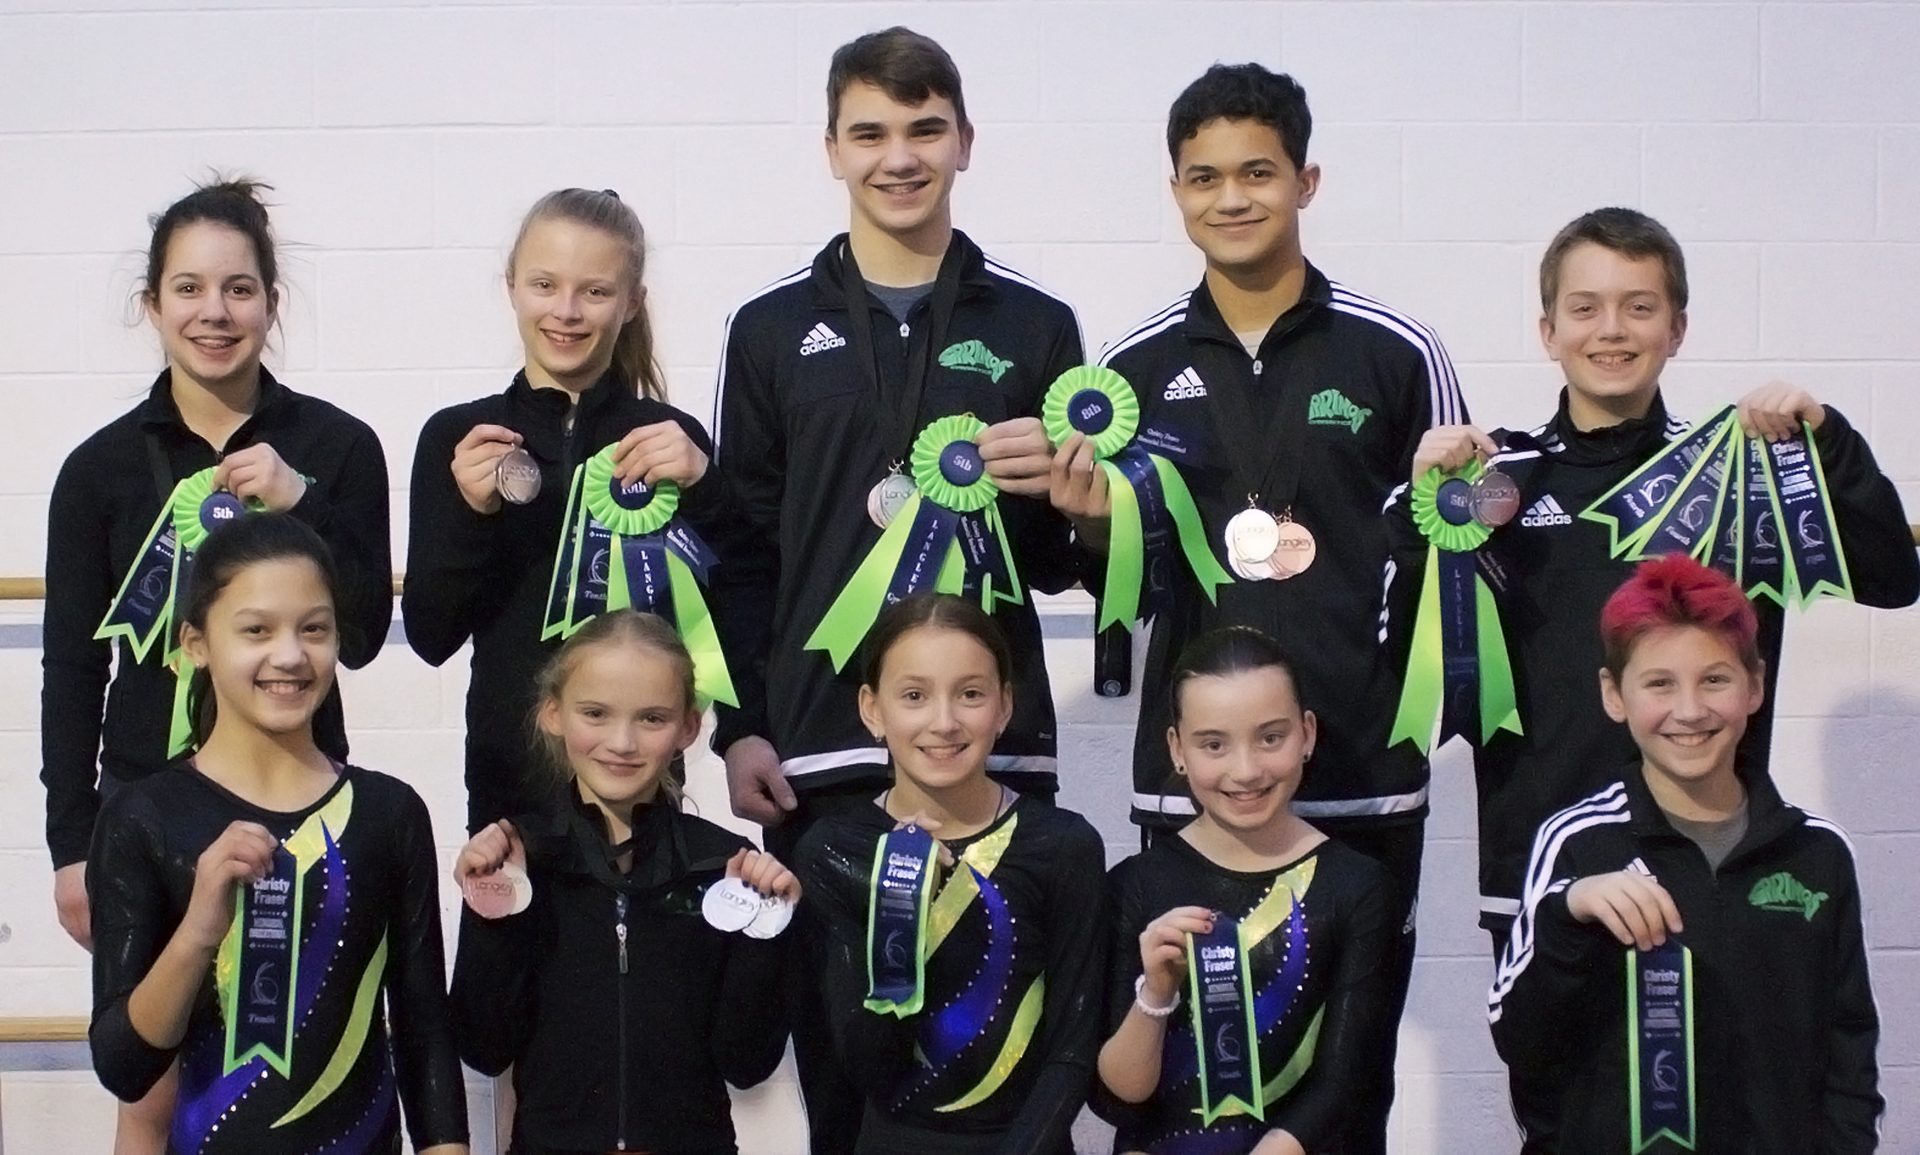 CR gymnasts have strong performance in Langley